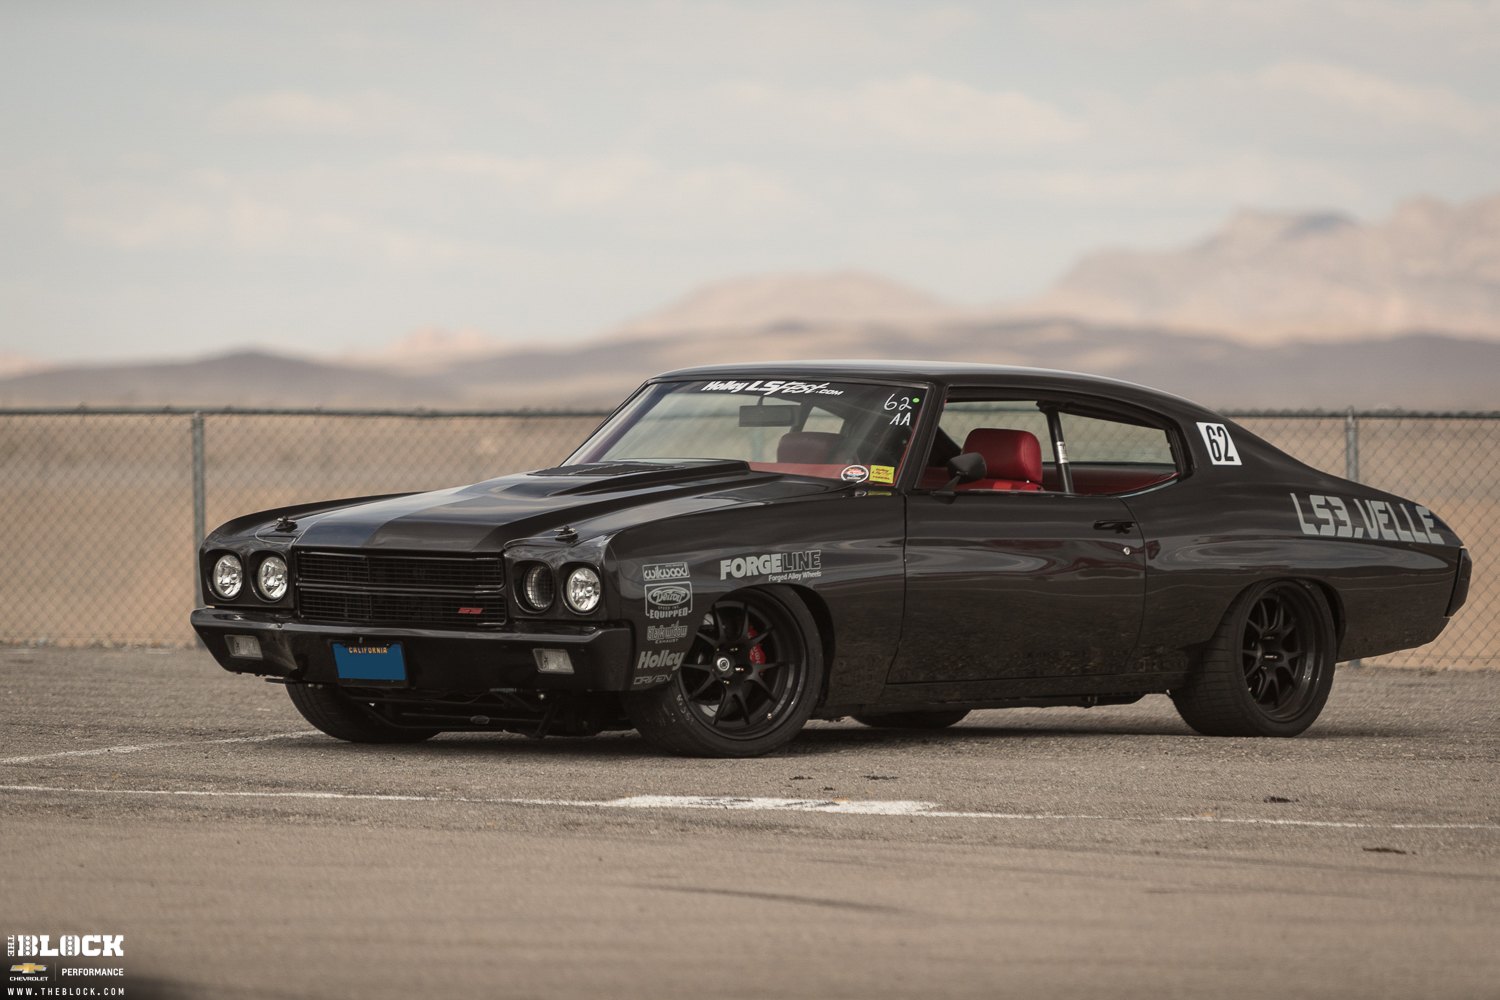 Black Debadged Chevy Chevelle with Aftermarket Hood - Photo by Forgeline Motorsports